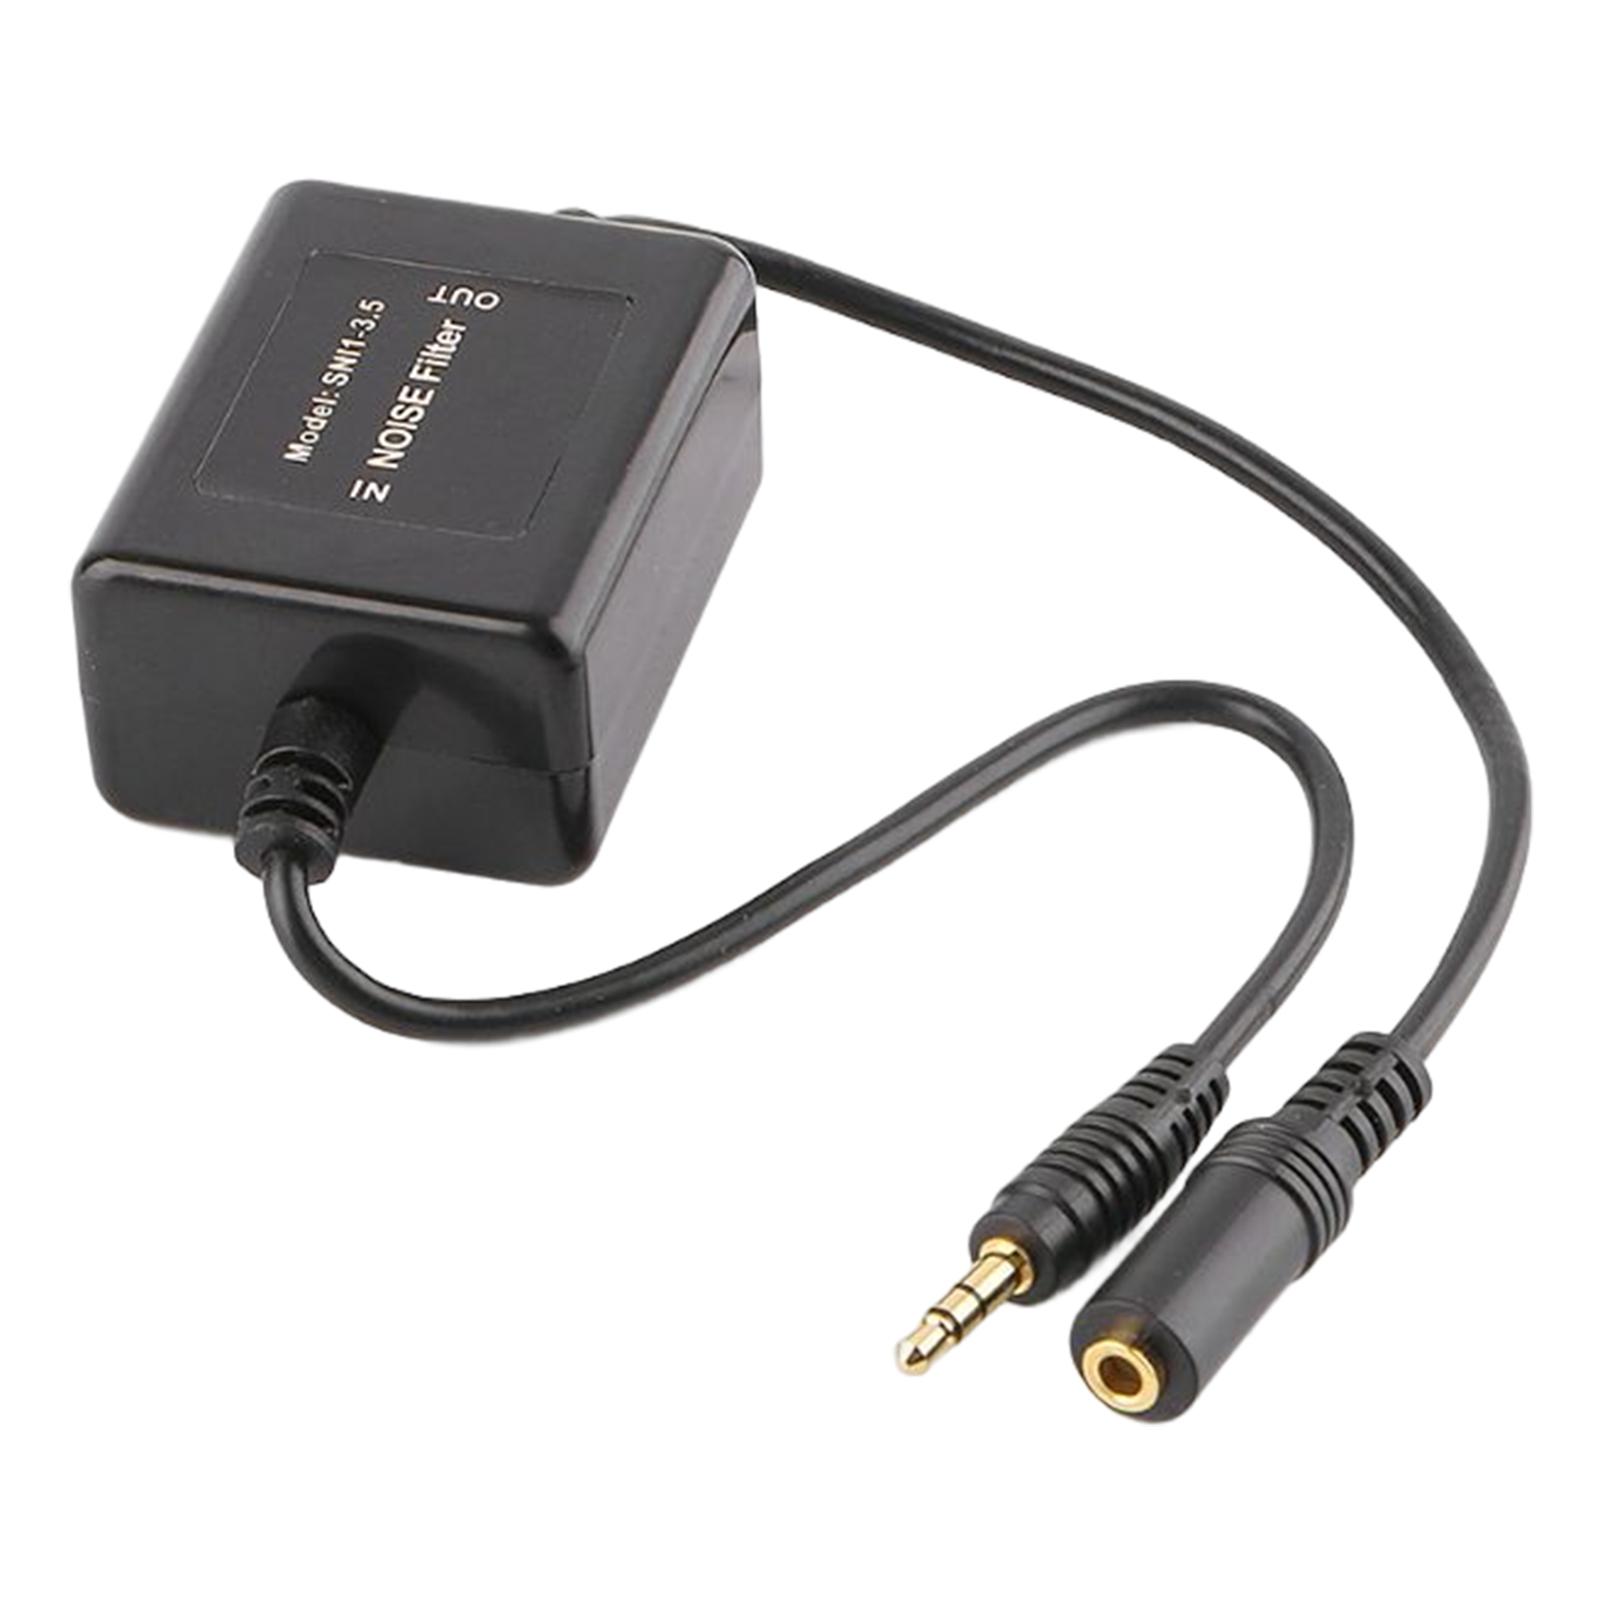 Ground Loop Noise Isolator 3.5mm Noise Filter for Car Audio Home Stereo